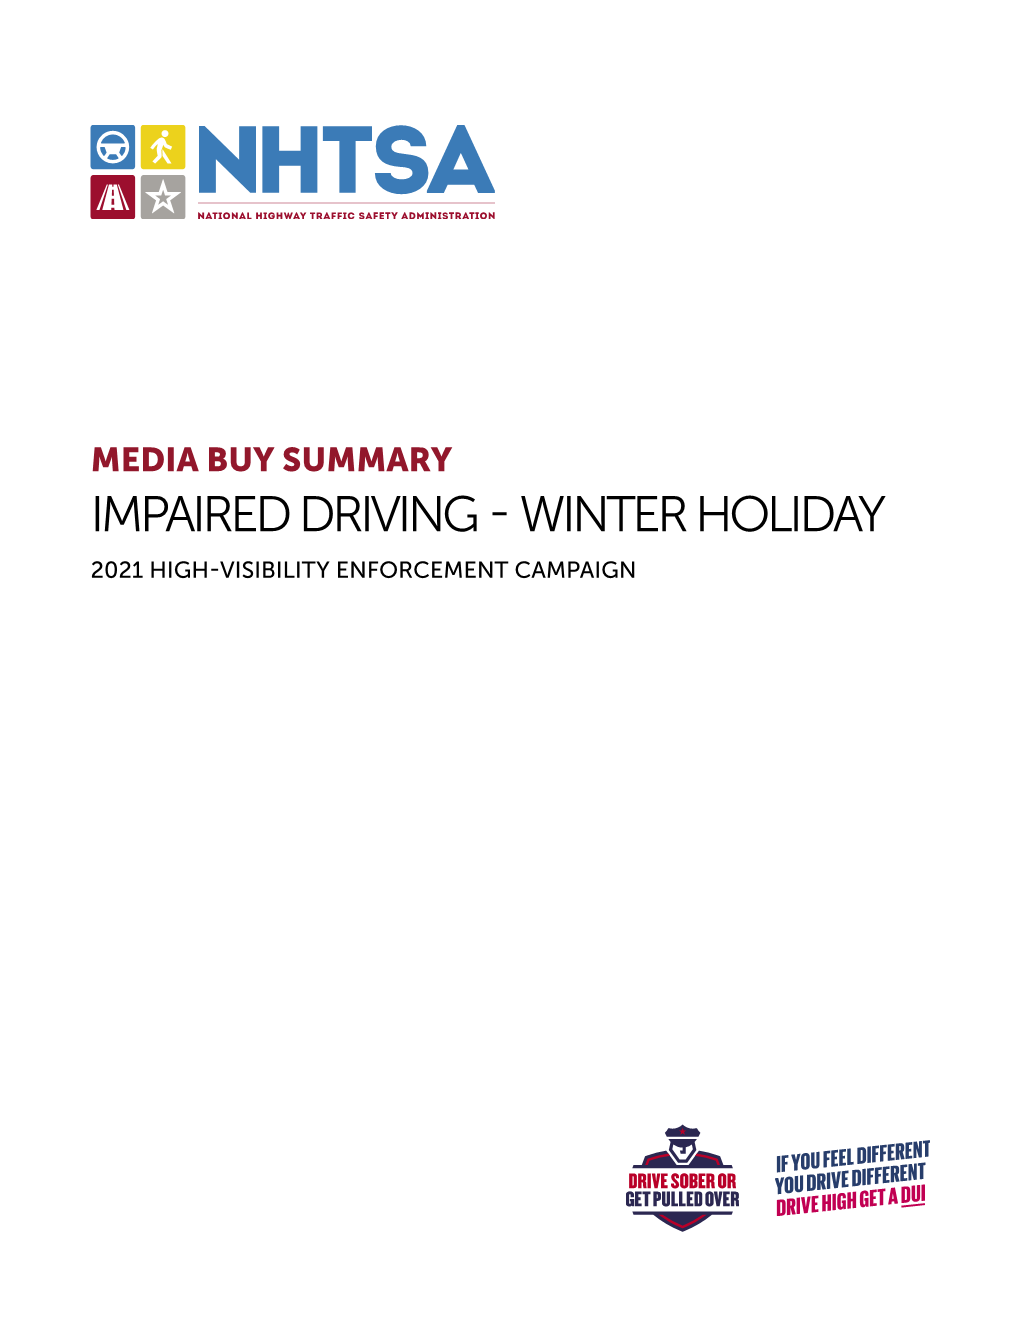 MEDIA BUY SUMMARY IMPAIRED DRIVING - WINTER HOLIDAY 2021 HIGH-VISIBILITY ENFORCEMENT CAMPAIGN Table of Contents